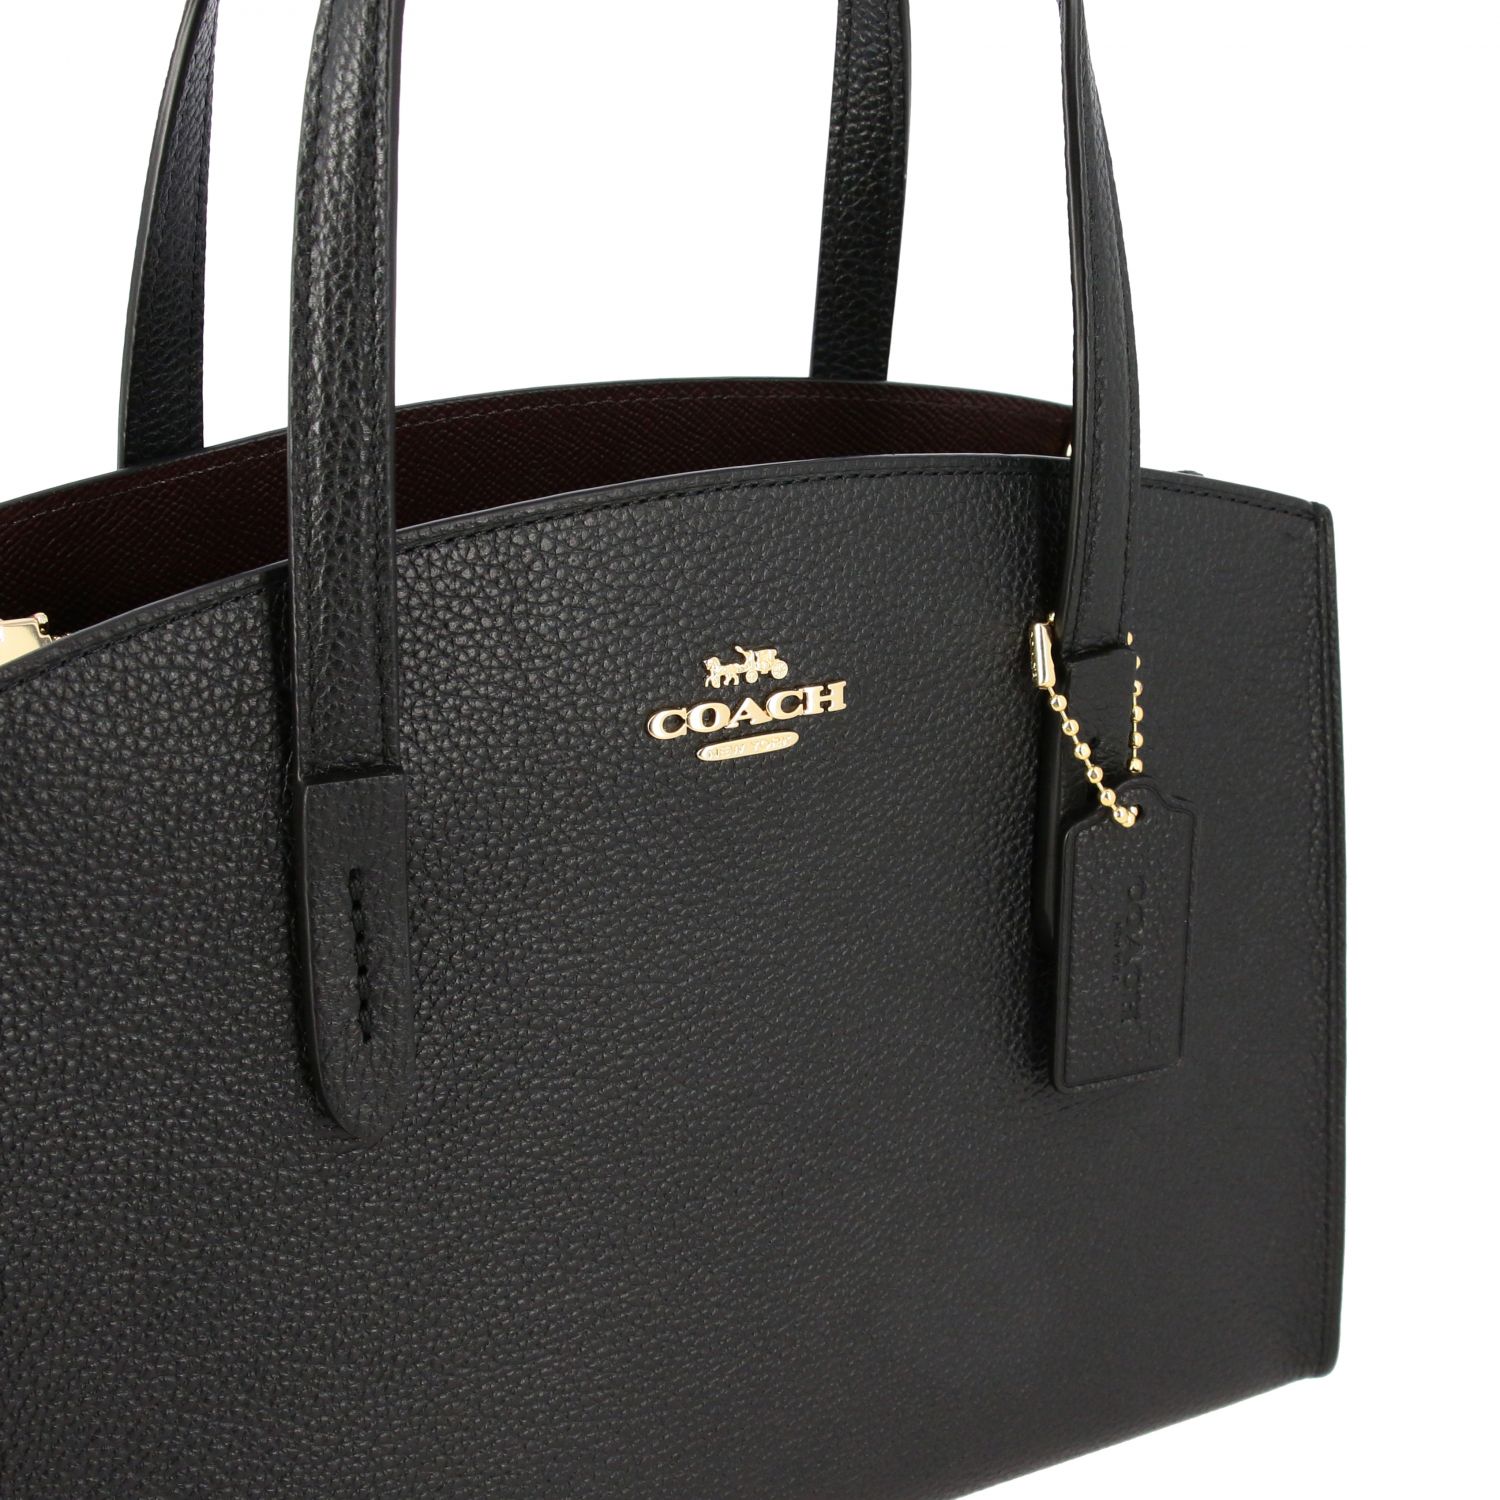 Coach Black Grained Tote Bag | epicrally.co.uk